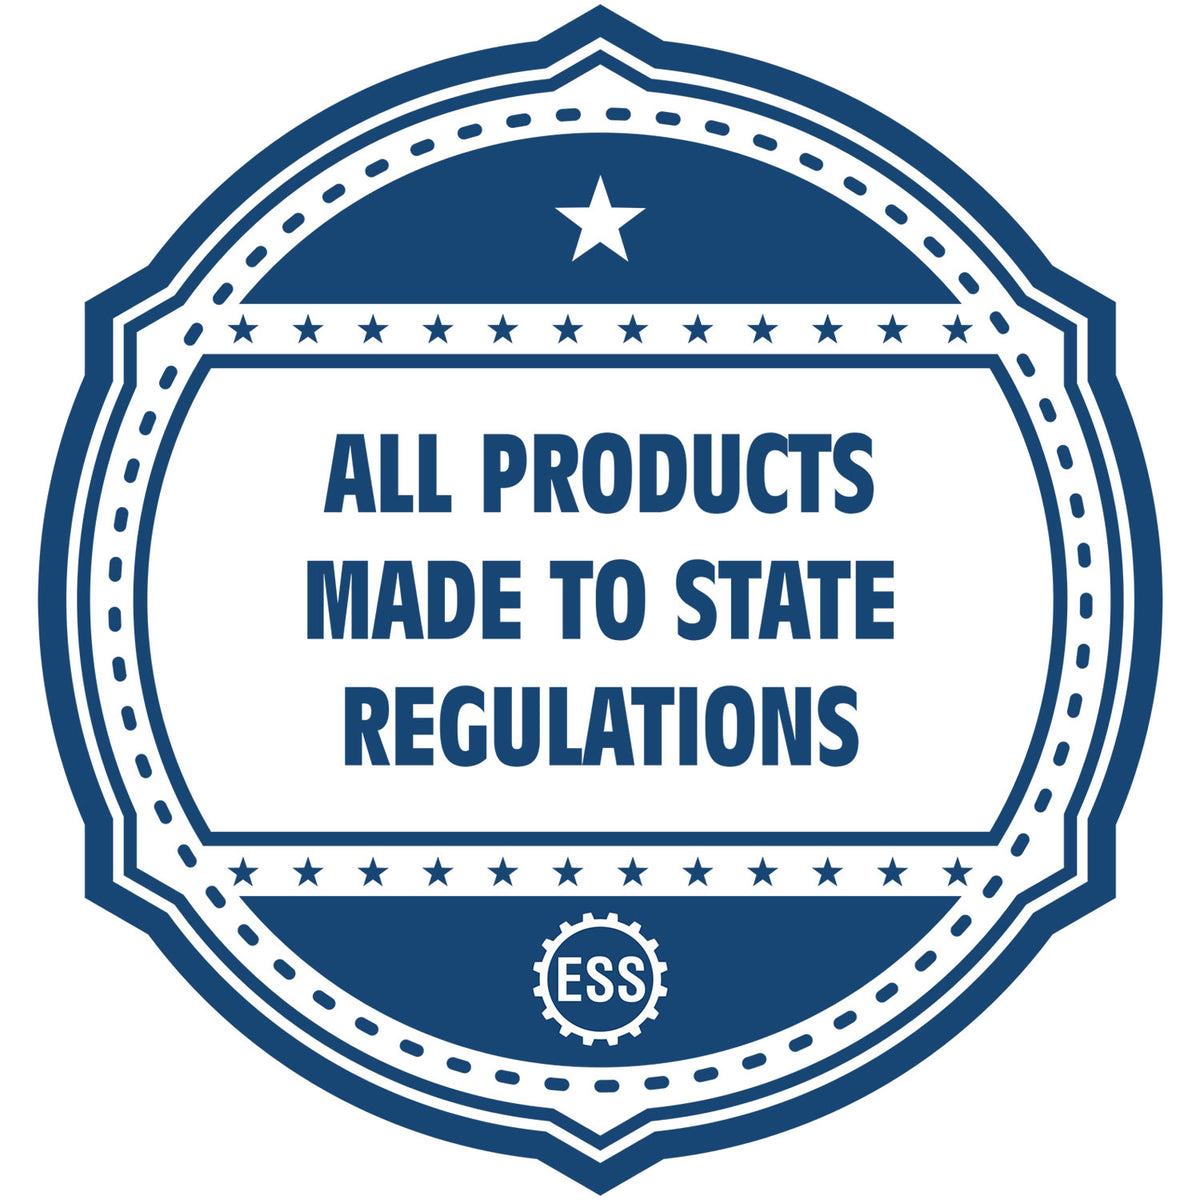 An icon or badge element for the Slim Pre-Inked State Seal Notary Stamp for Texas showing that this product is made in compliance with state regulations.